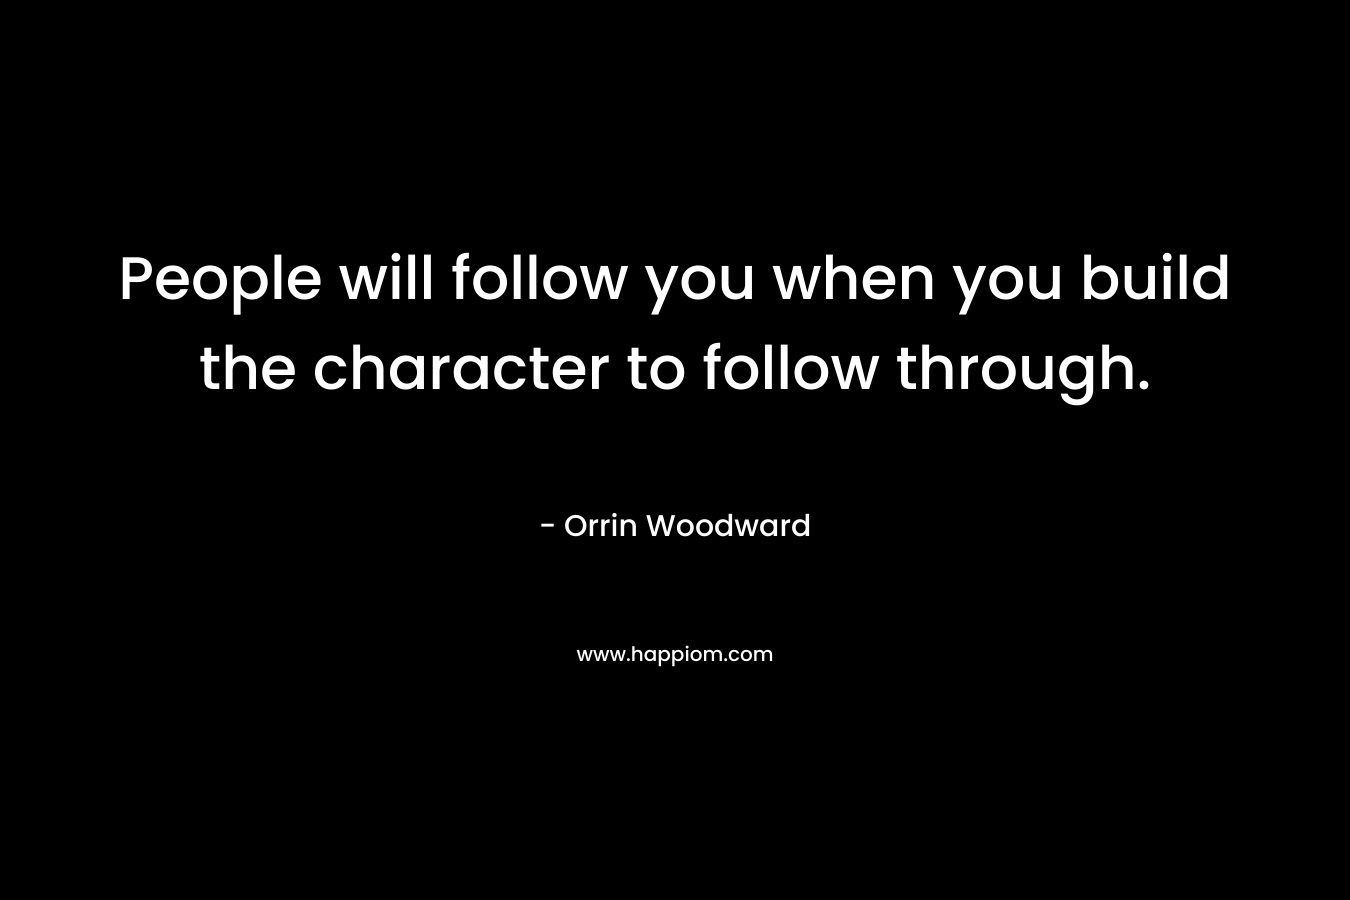 People will follow you when you build the character to follow through.